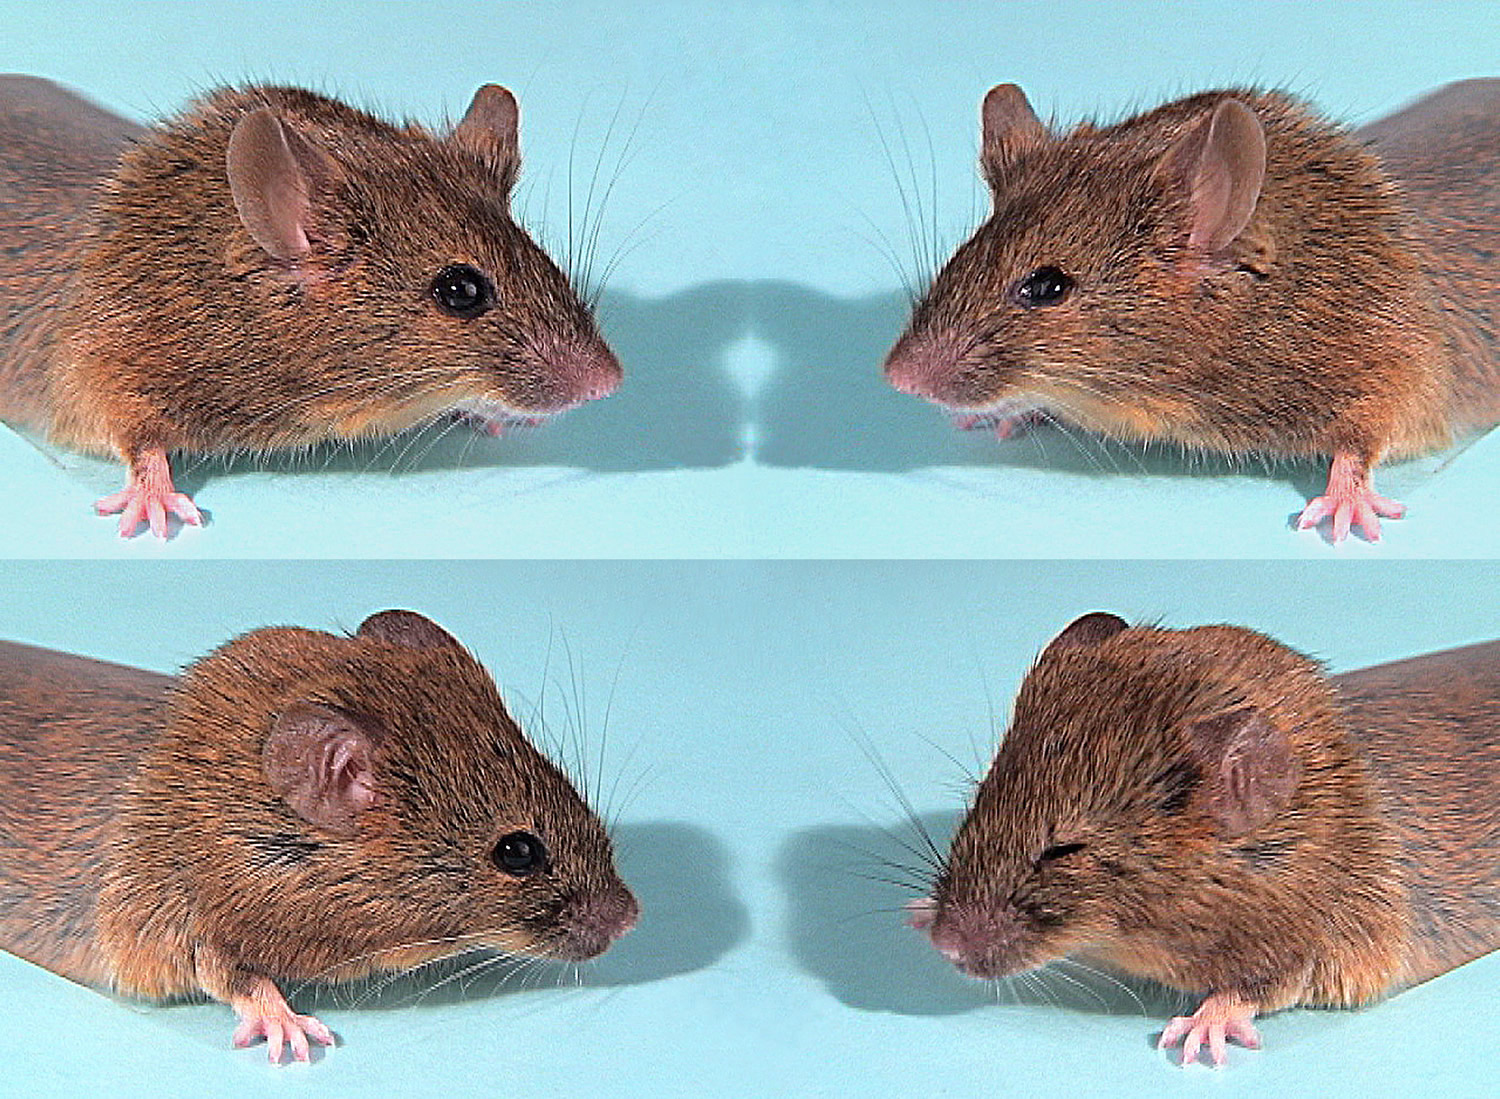 At top and bottom left are two mice in which a gene named Hoxb1 has been disabled. The gene controls the development of nerves needed for facial expressions. When a puff or air was blown into the face of the first mouse (top right), it was unable to blink its eyes, wiggle its whiskers or pull back its ears due to facial paralysis caused by the lack of the Hoxb1 gene. But in the mouse on the bottom, a key piece of the Hoxb1 gene was inserted into a gene named Hoxa1, in effect recreating an ancient gene that once did the job of both Hoxb1 and Hoxa1. So when a puff of air was blown in the face of that mouse (bottom right), it was able to blink its eyes, wiggle its whiskers and fold back its ears -- thanks to the reconstructed, anicent gene.